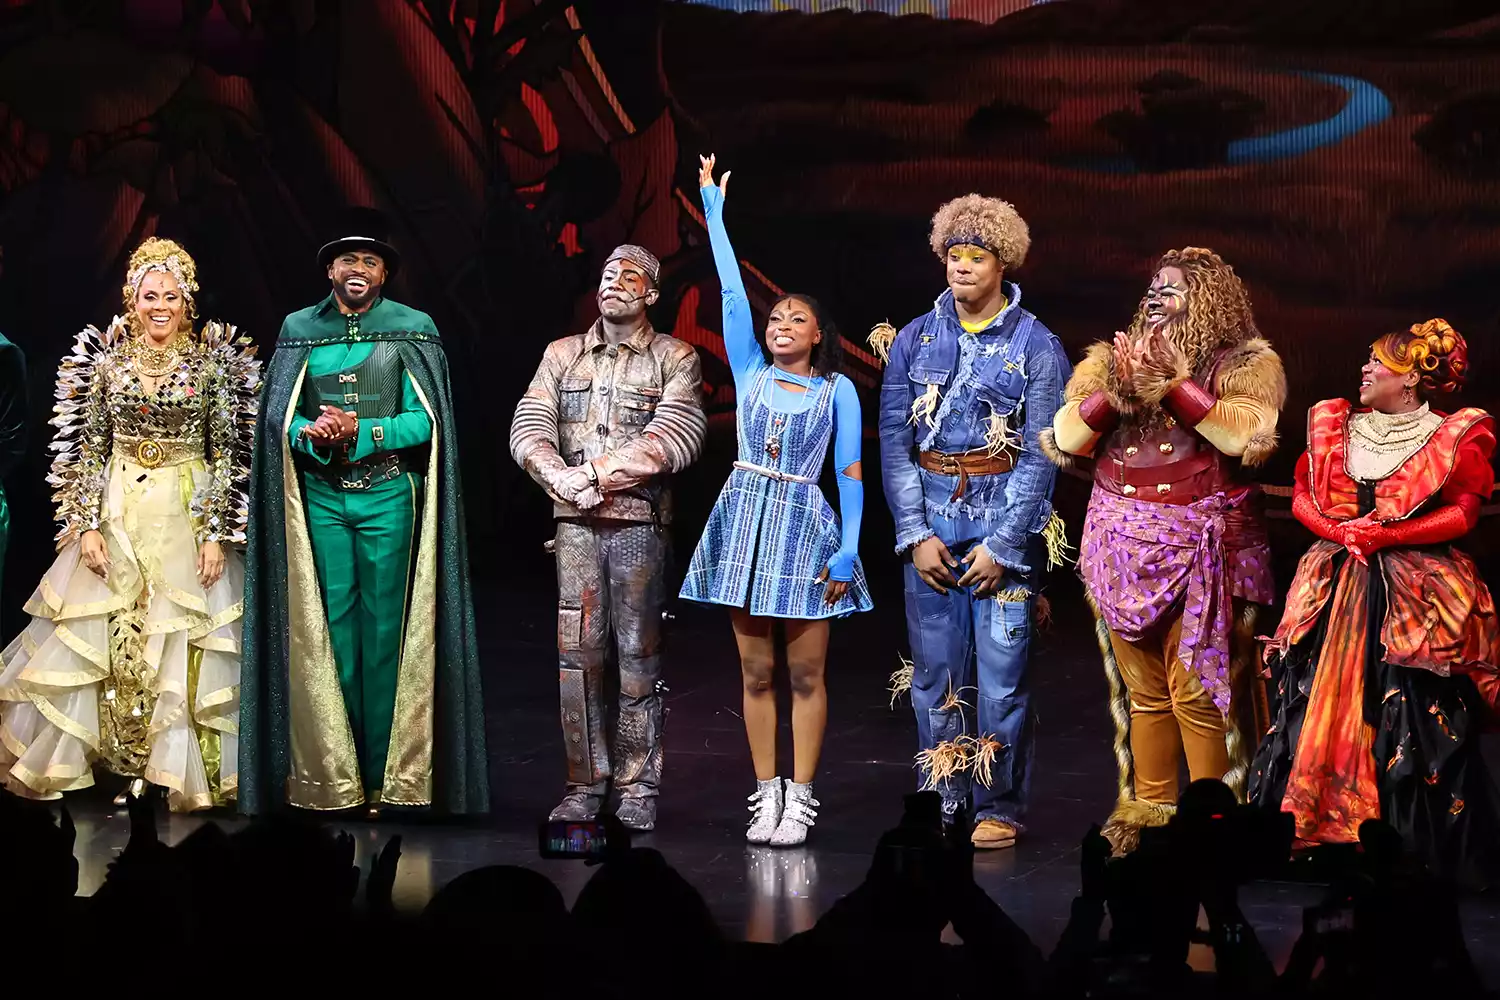 Nichelle Lewis Prepares for Broadway Debut in The Wiz A Dream Come True